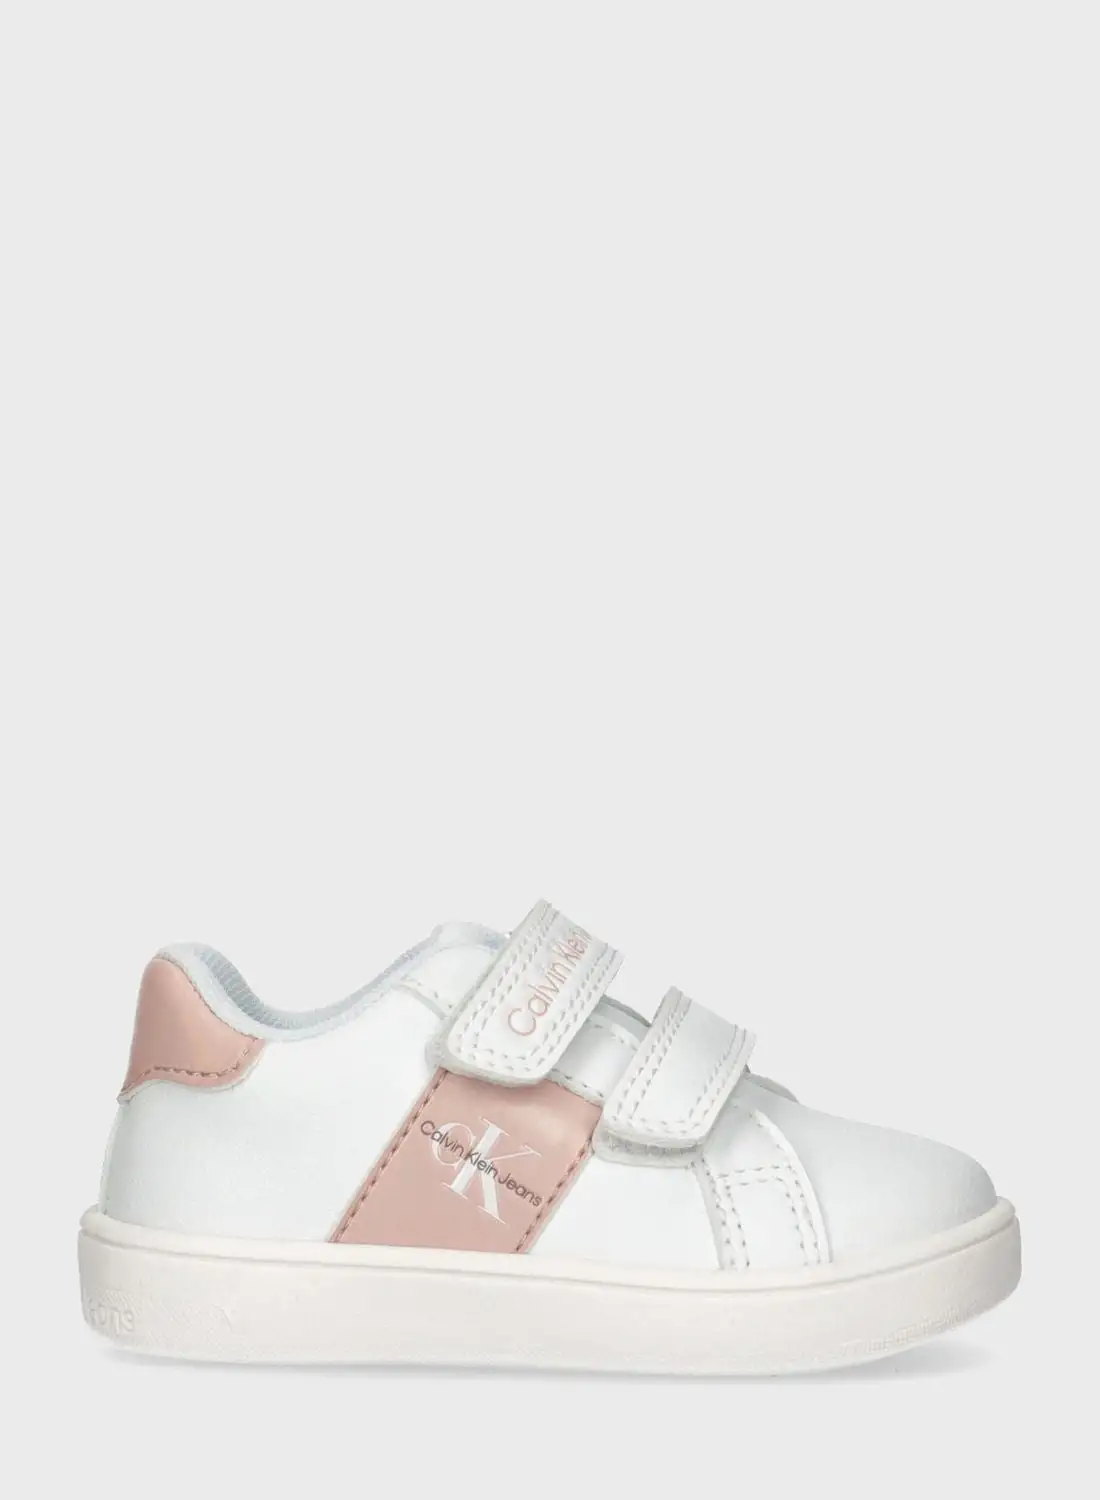 Calvin Klein Jeans Youth Low Top Velcro Sneakers